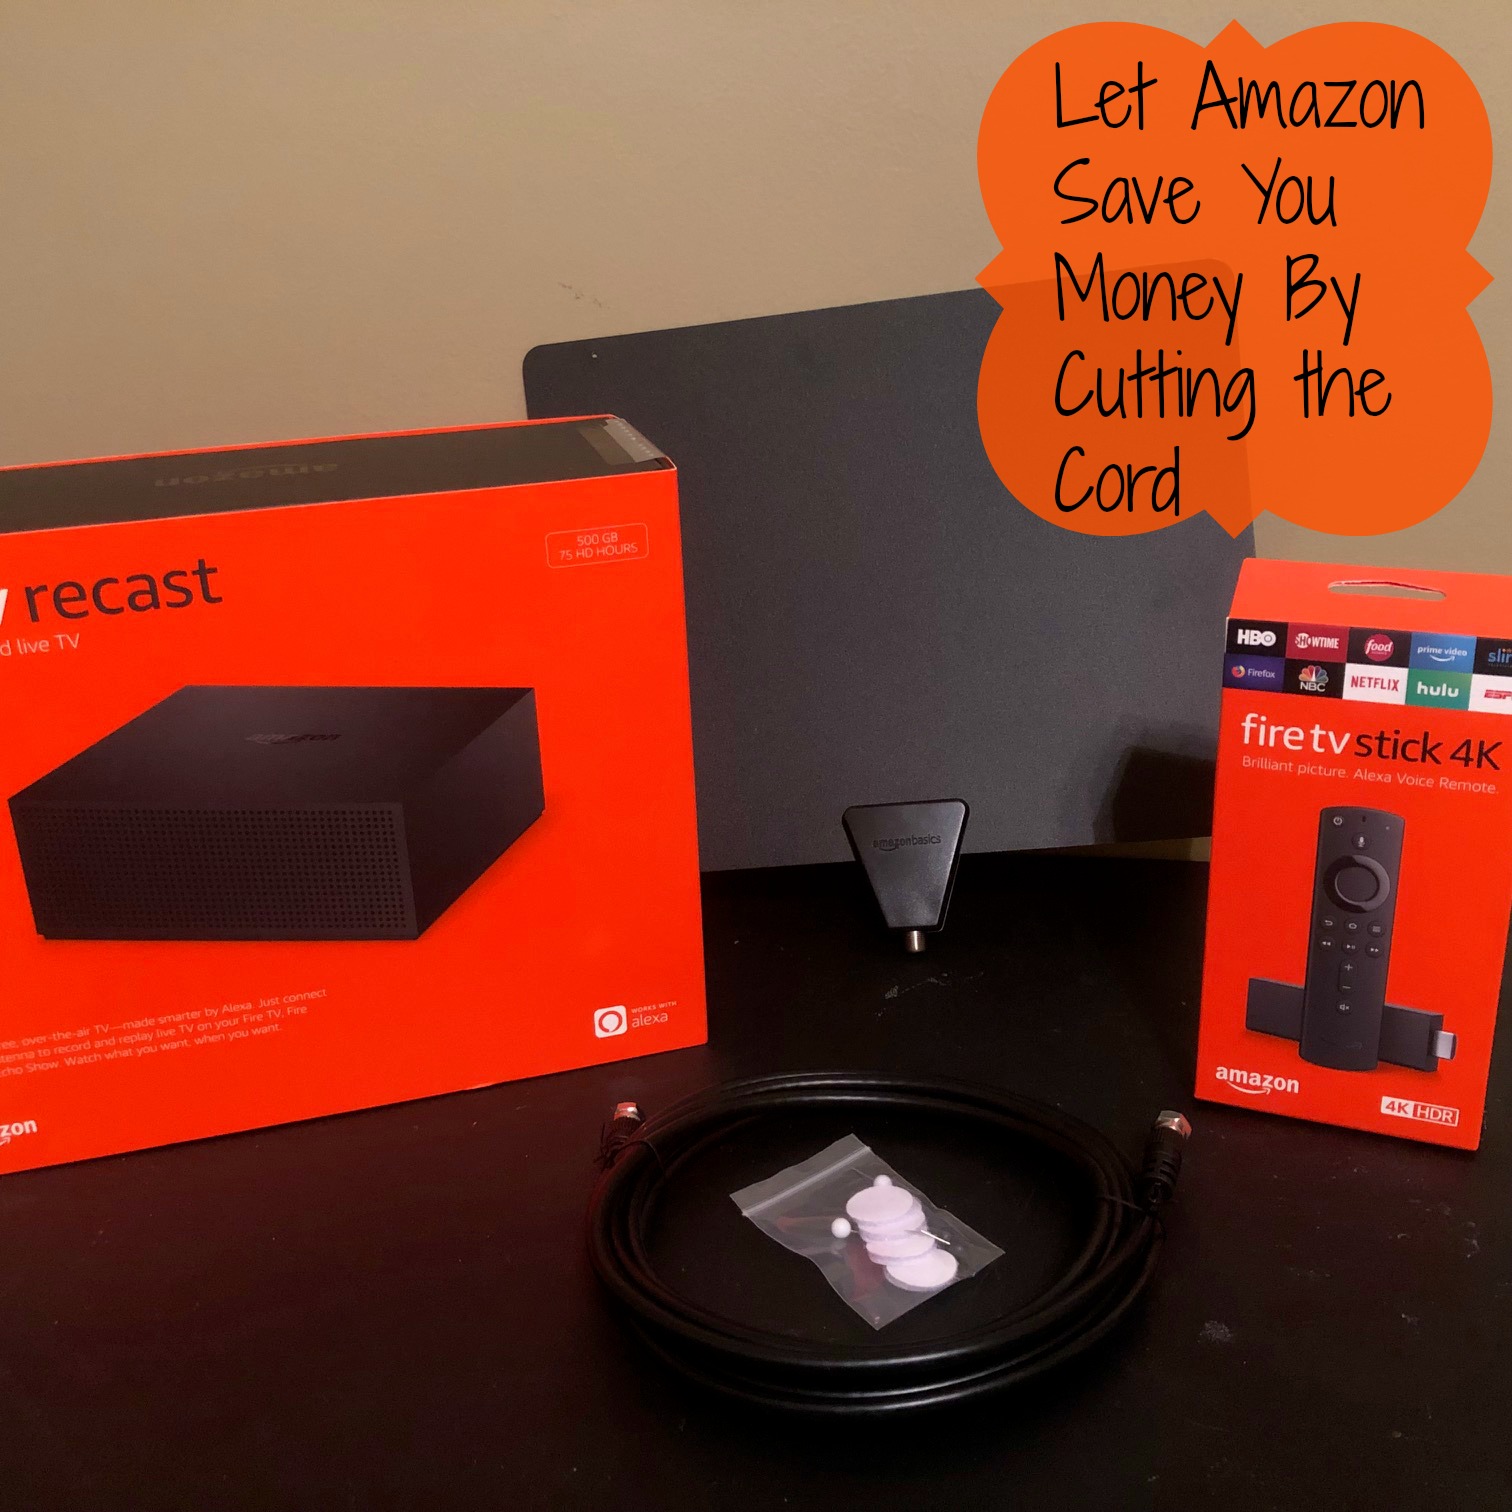 Let Amazon Save You Money By Cutting the Cord